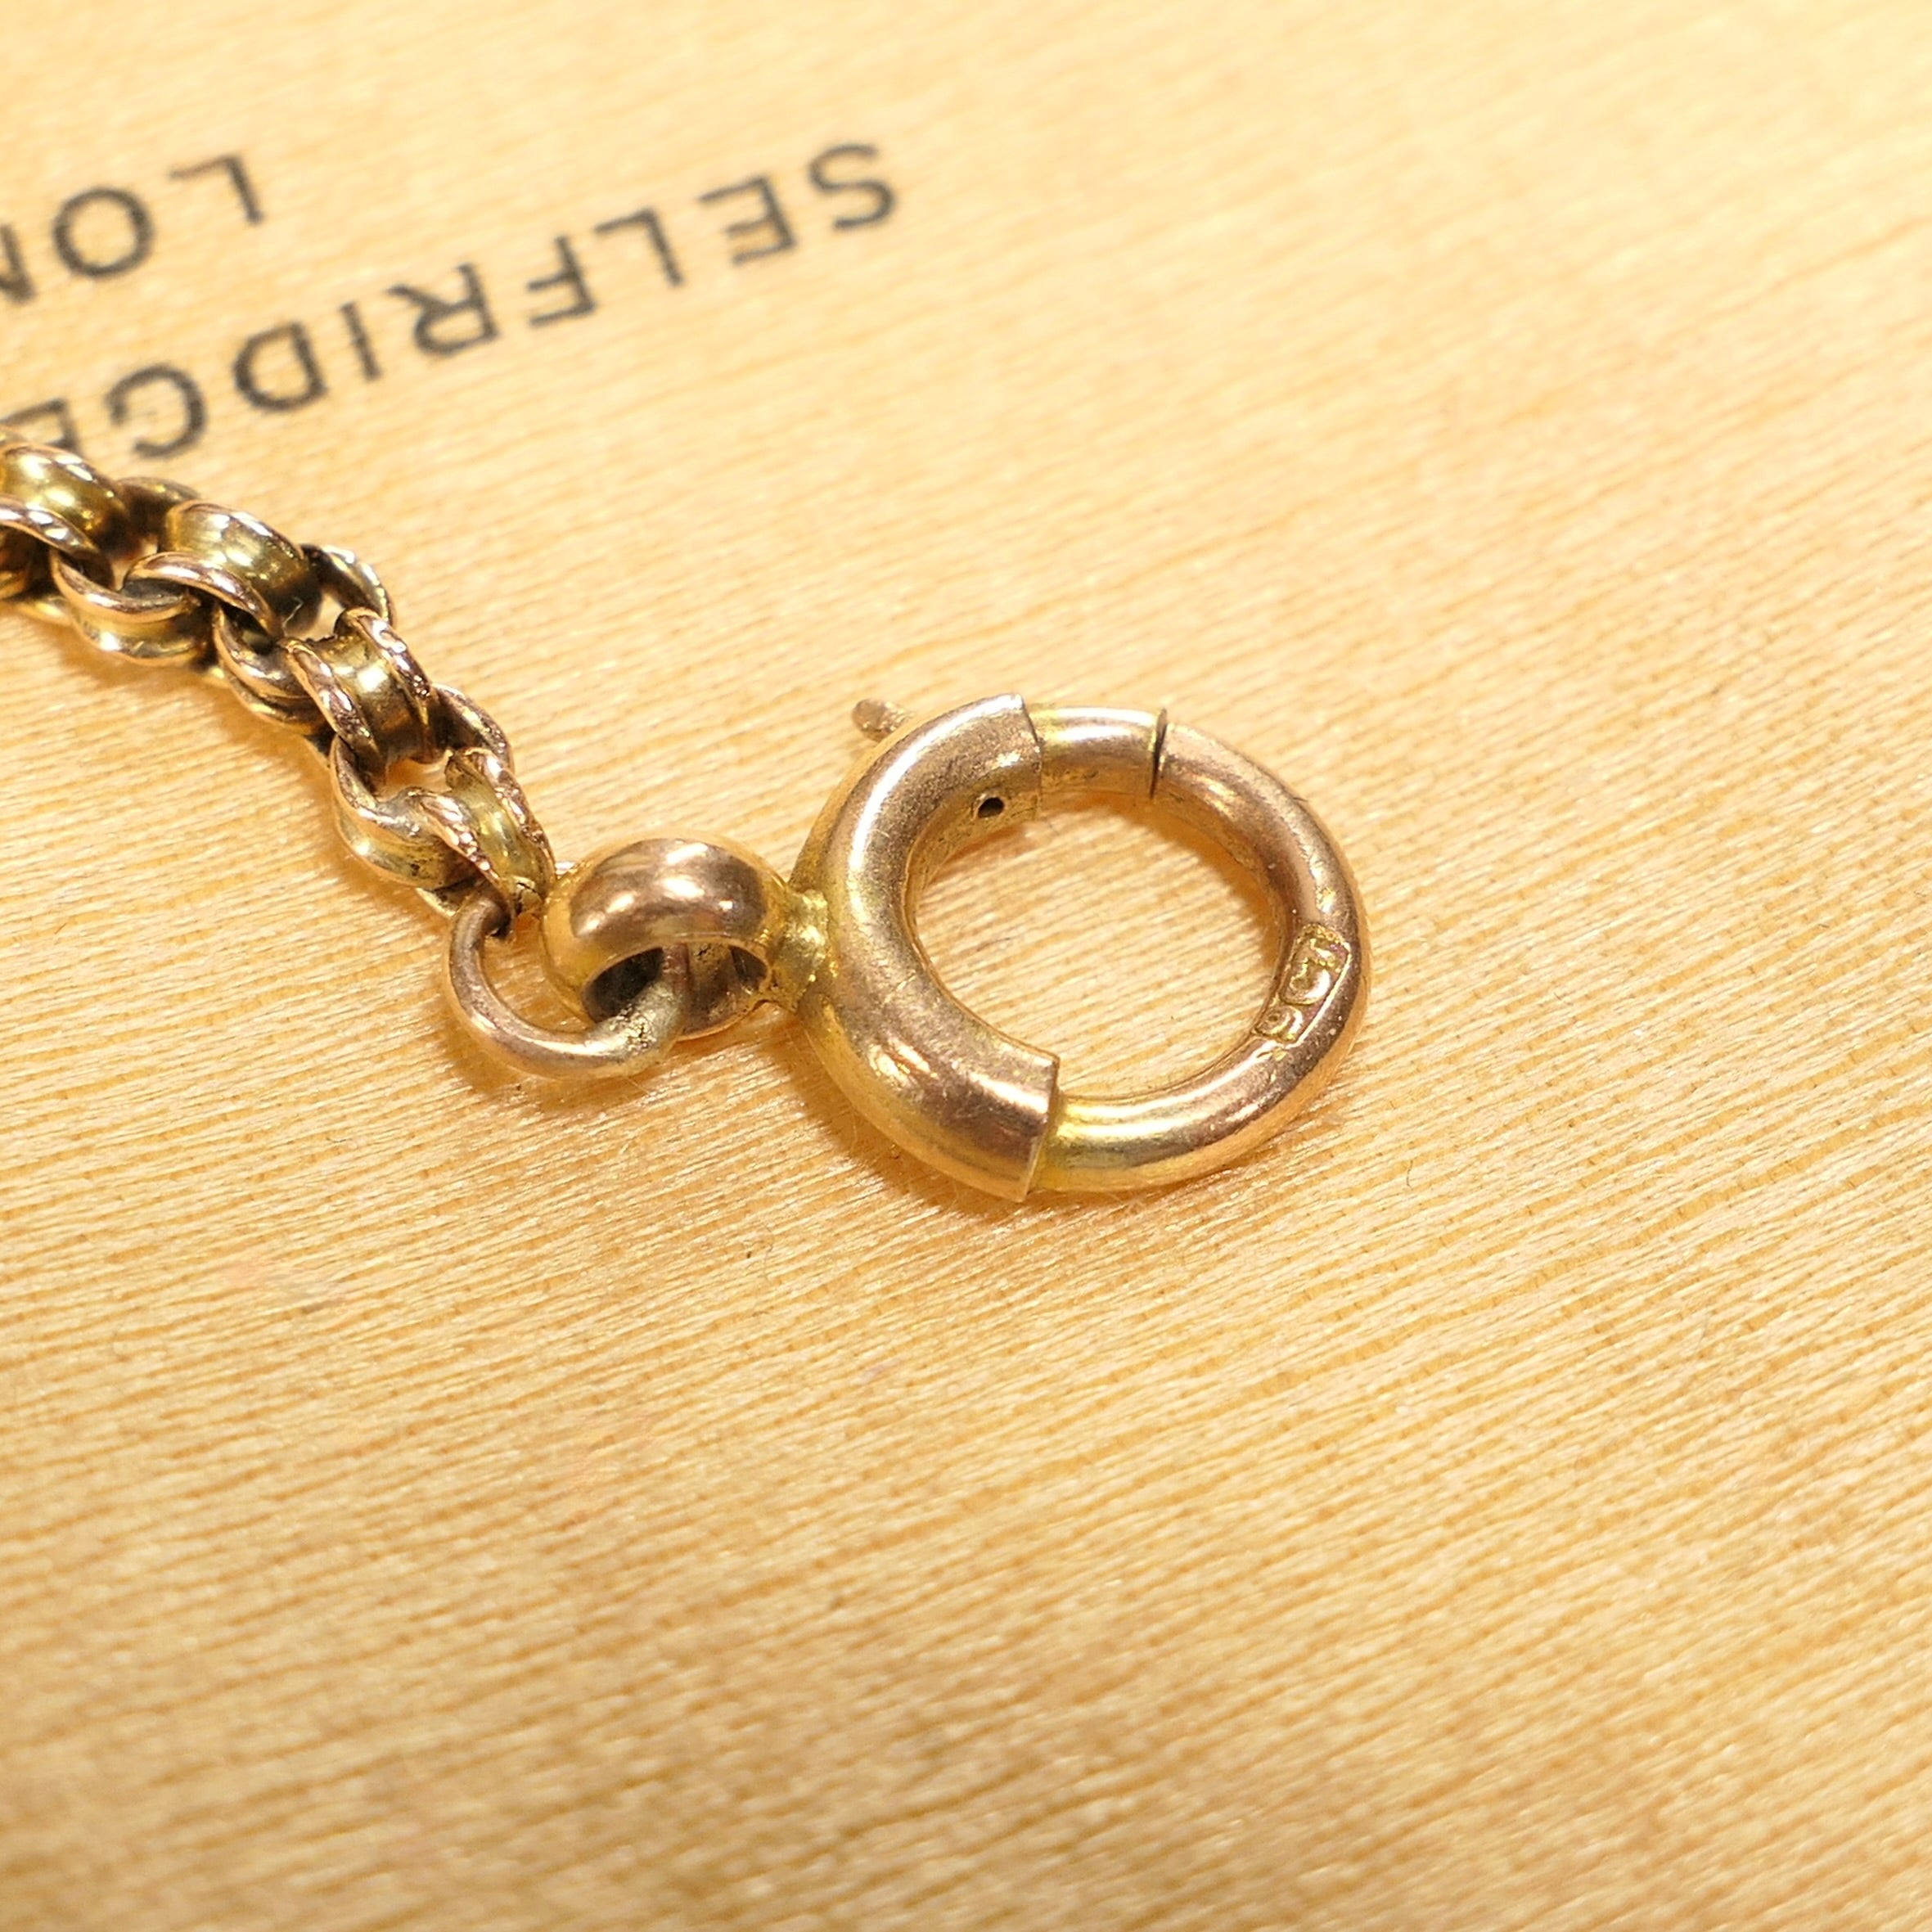 Vintage rolo chain with chunky bolt ring clasp